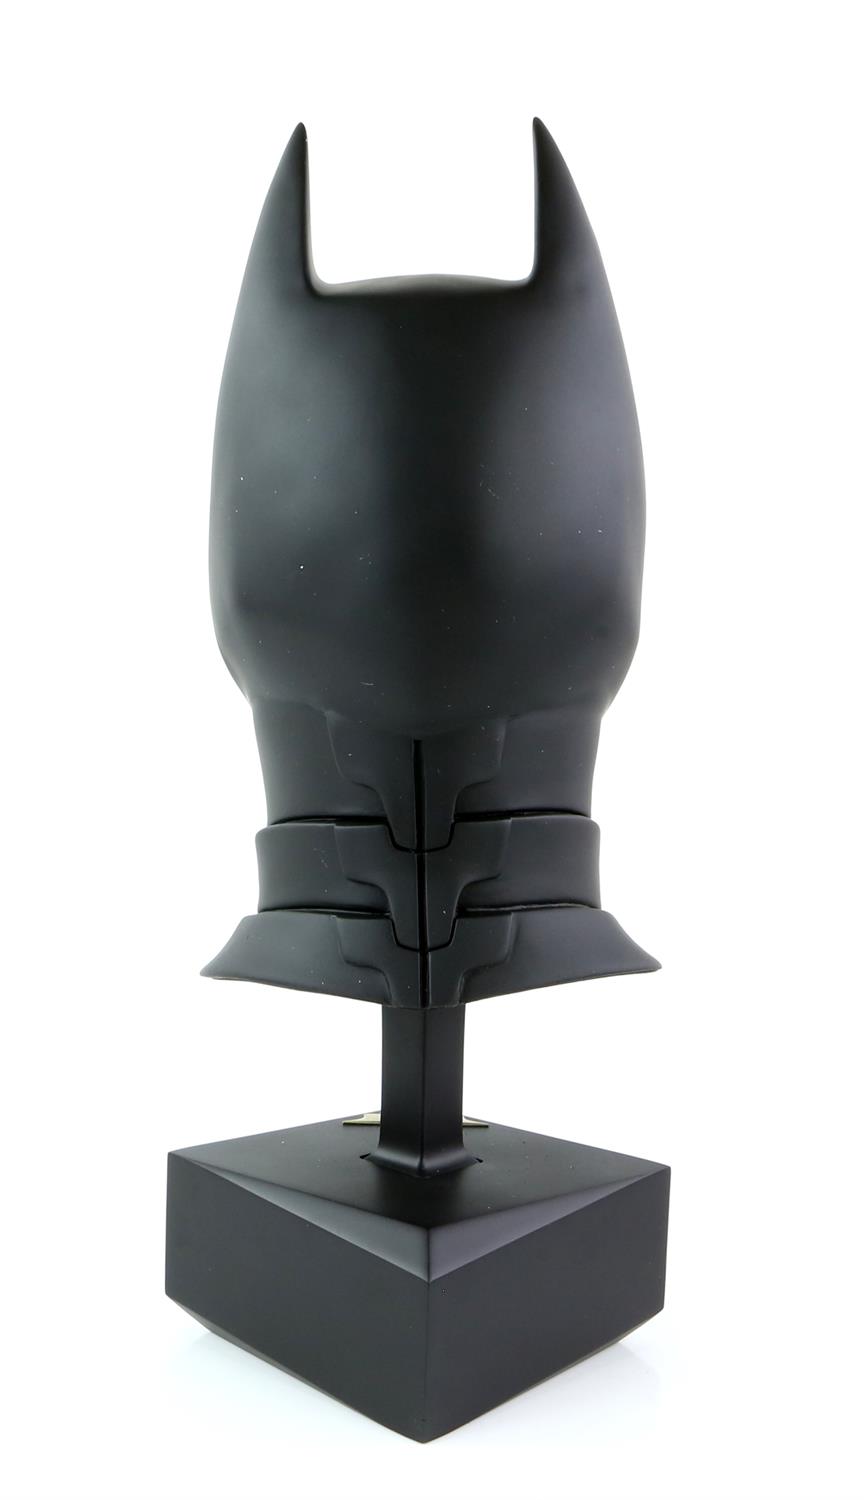 The Dark Knight (2008) - A Replica Bat Cowl. Full-scale licensed replica Bat Cowl produced by The - Image 3 of 4